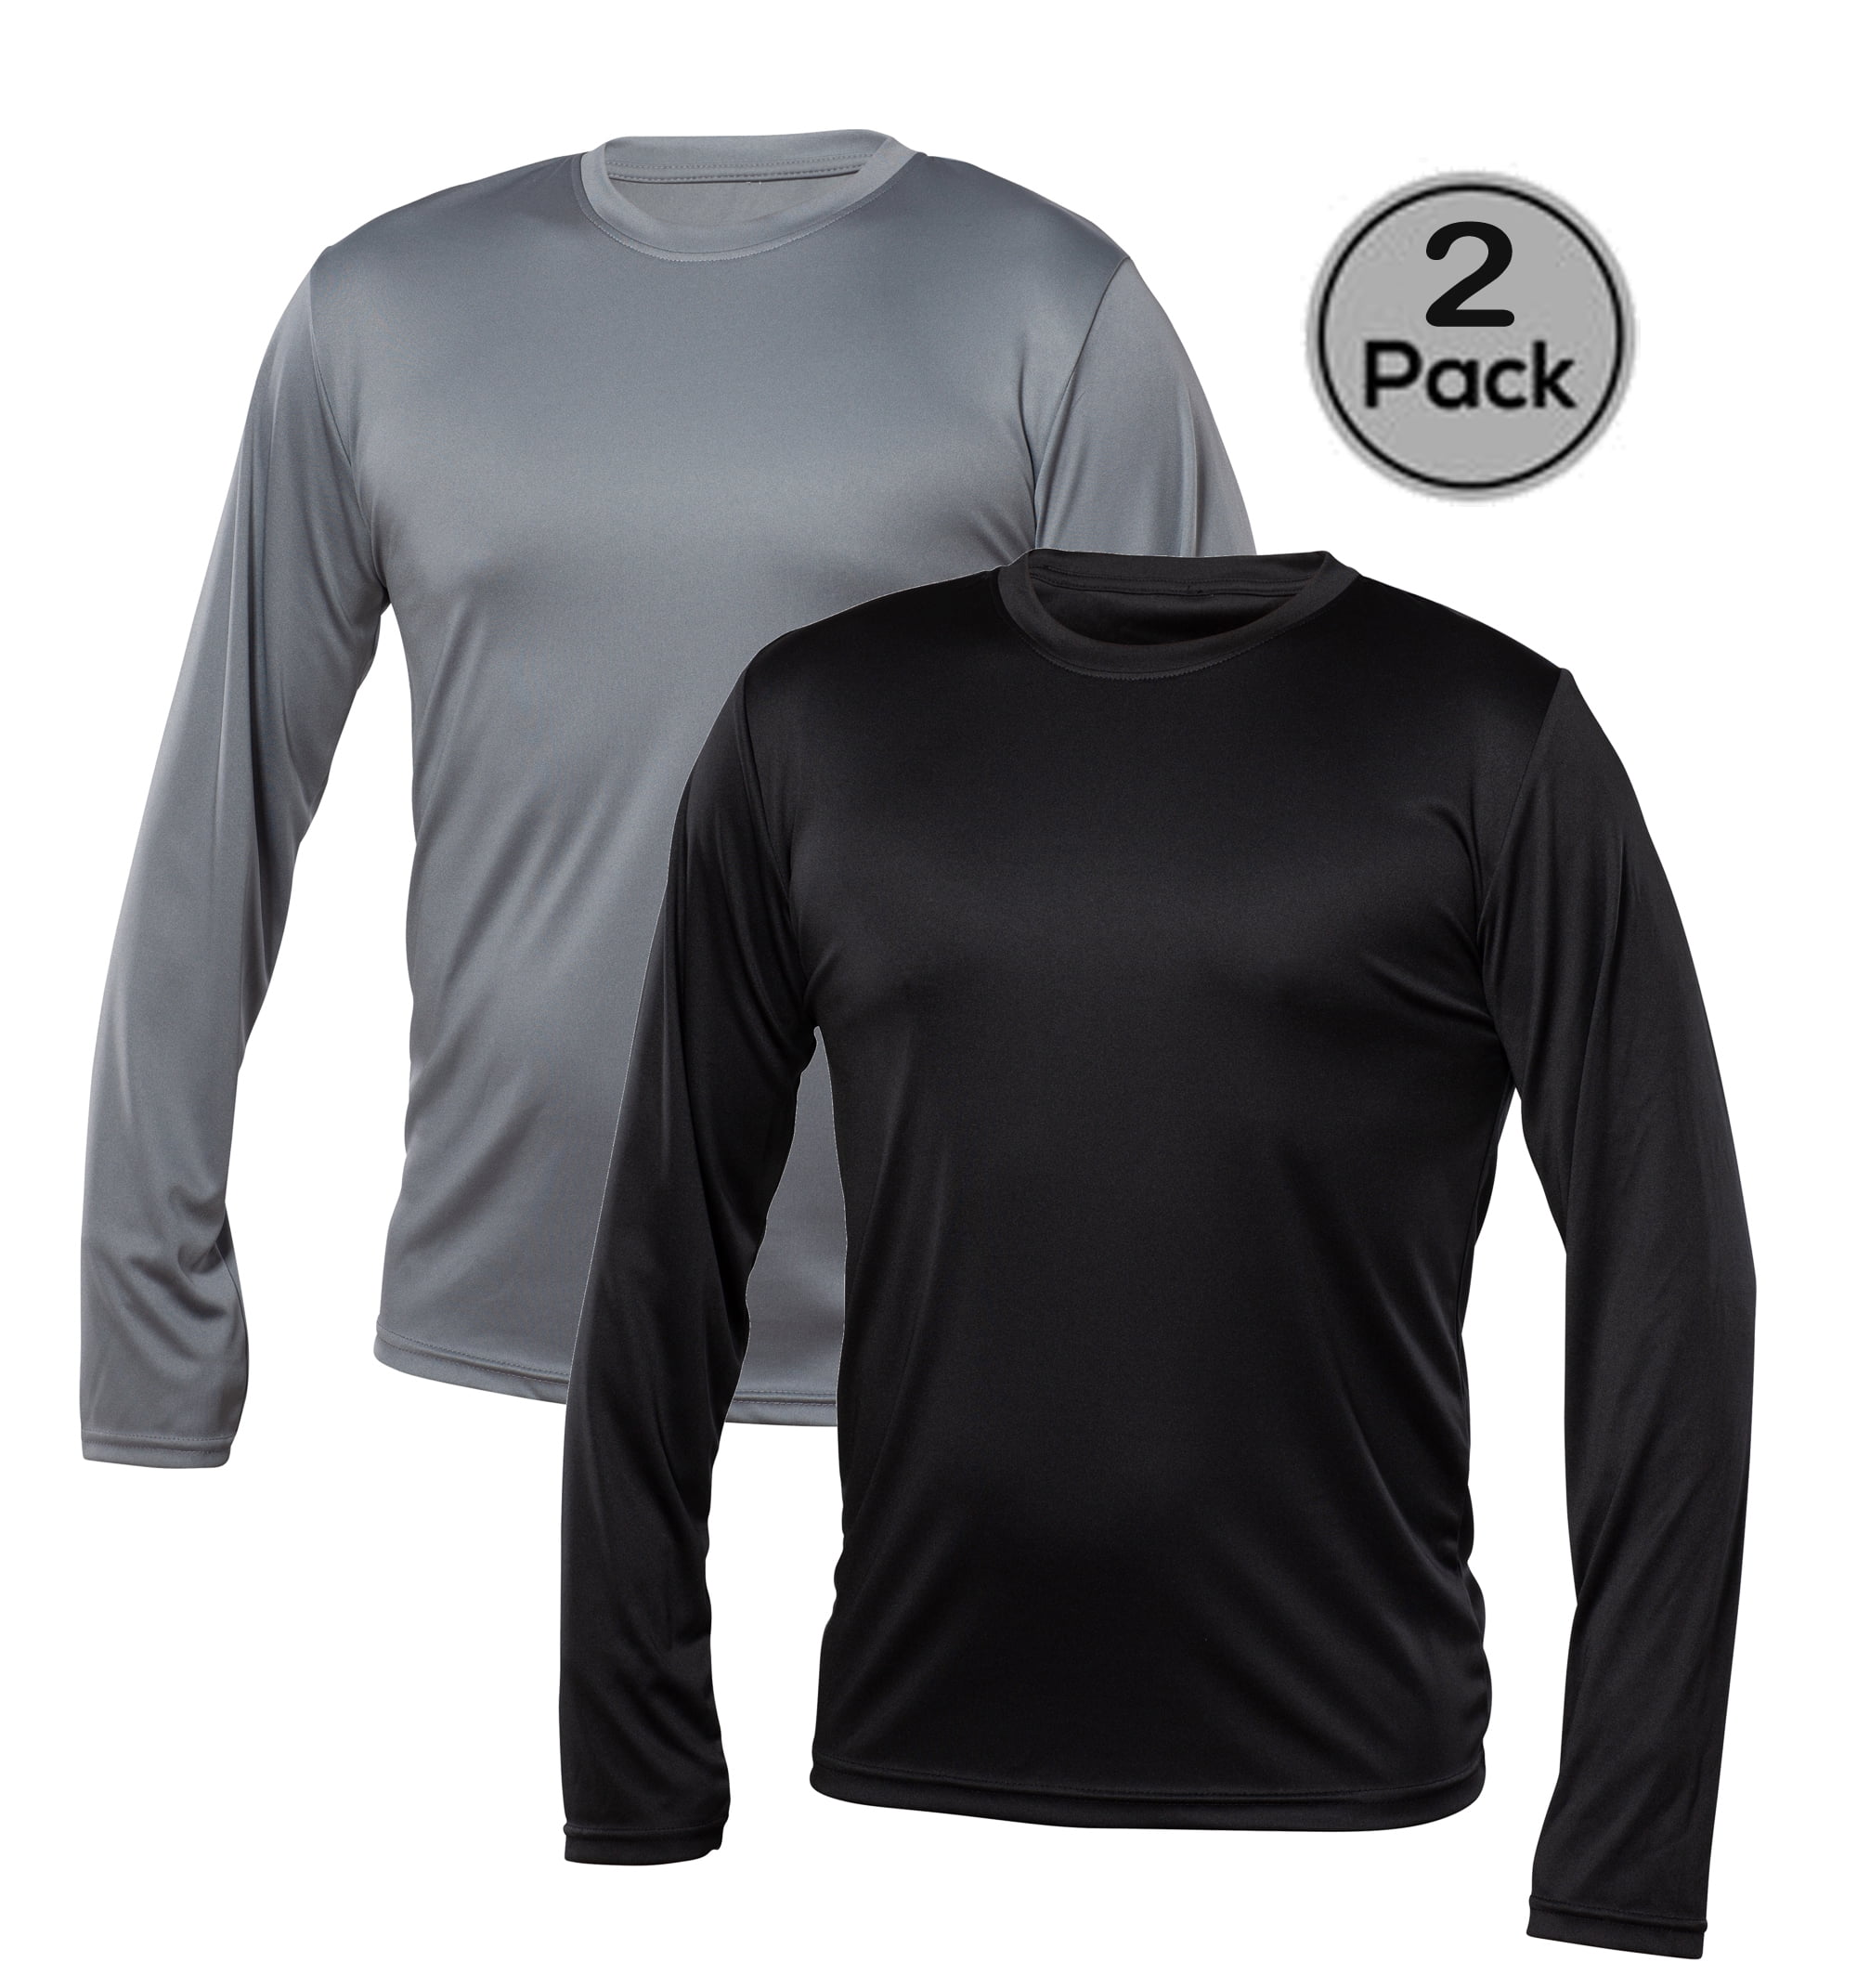 TEXFIT Men's Active Sport Long Sleeve Shirts with Quick Dry Fabric 2 Pack 